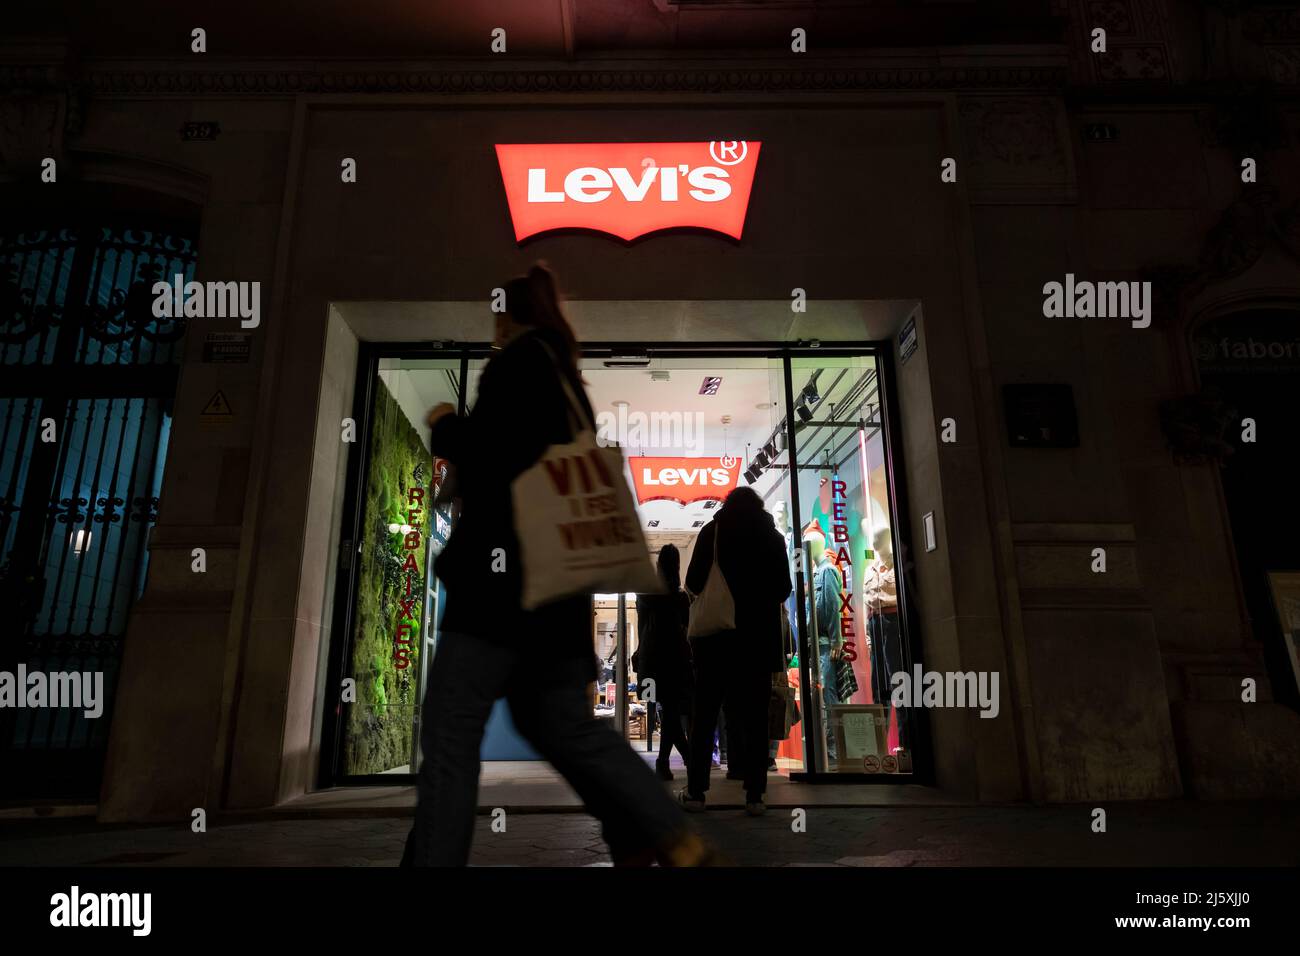 Barcelona, Spain - Jan 07, 2022: Levi's or Levi Strauss & Co. clothing store  on Paseo de Gracia, one of the city's main avenues Stock Photo - Alamy